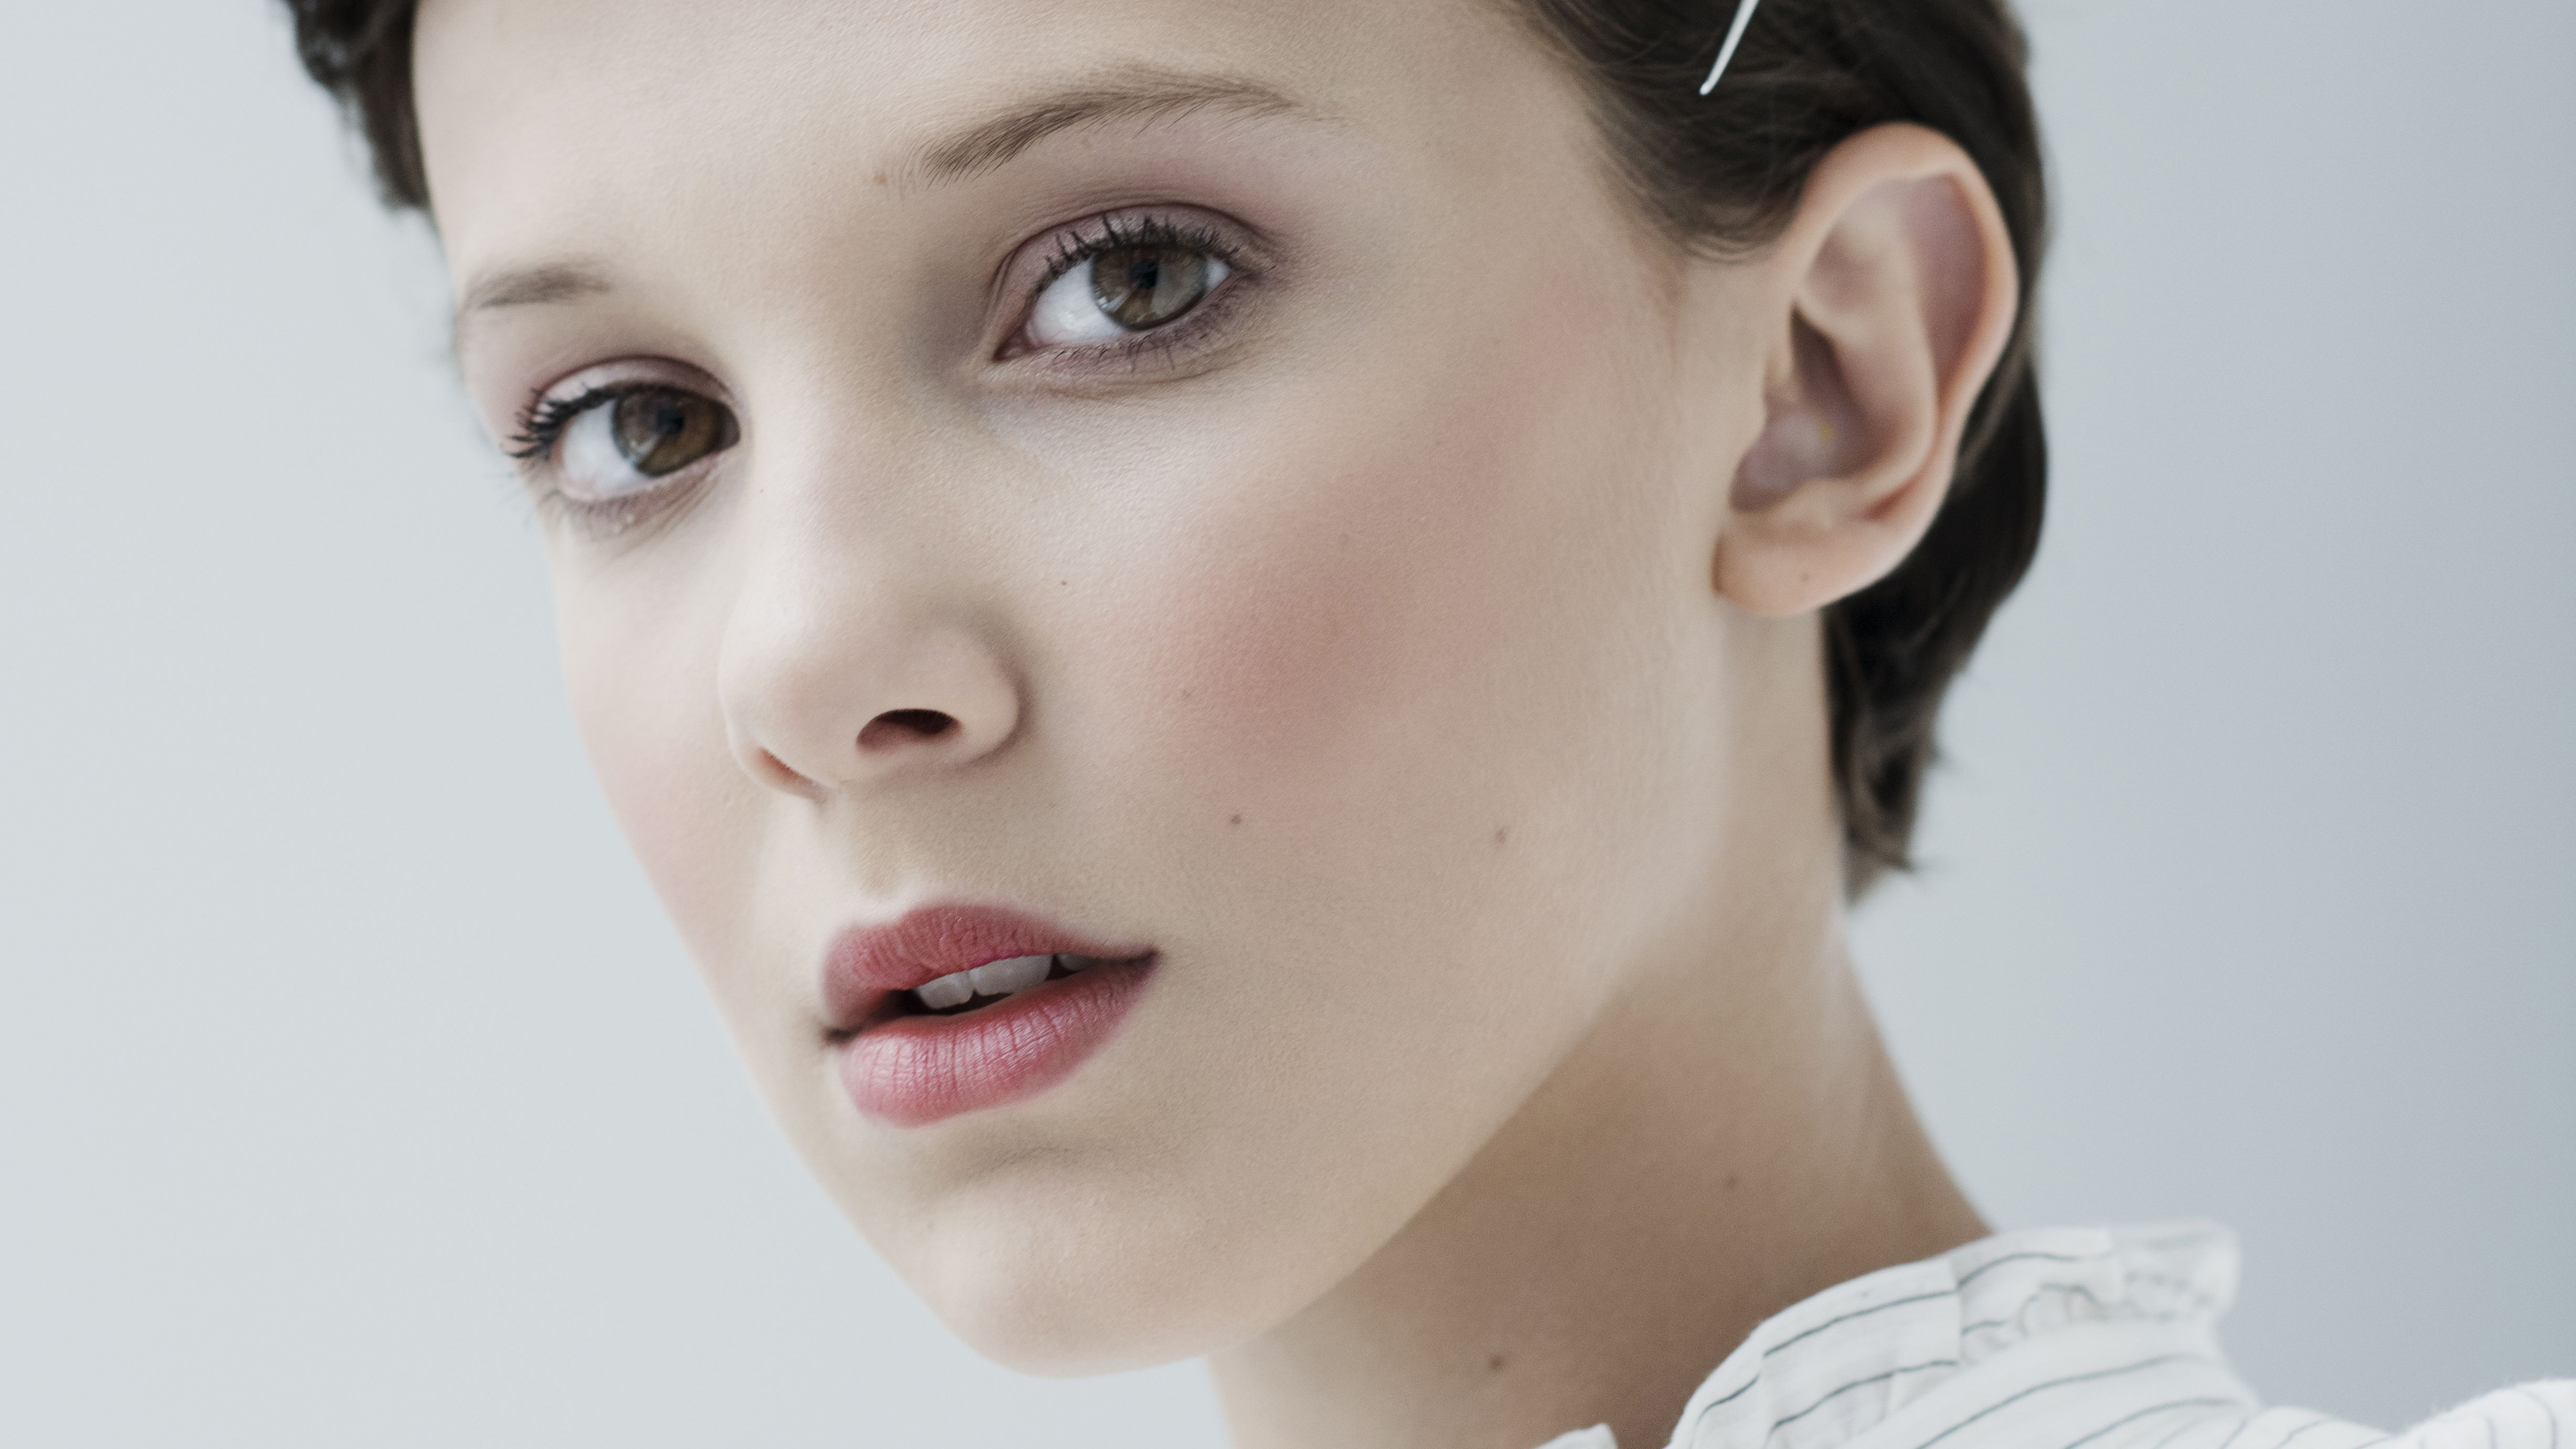 millie bobby brown computer Wallpapers